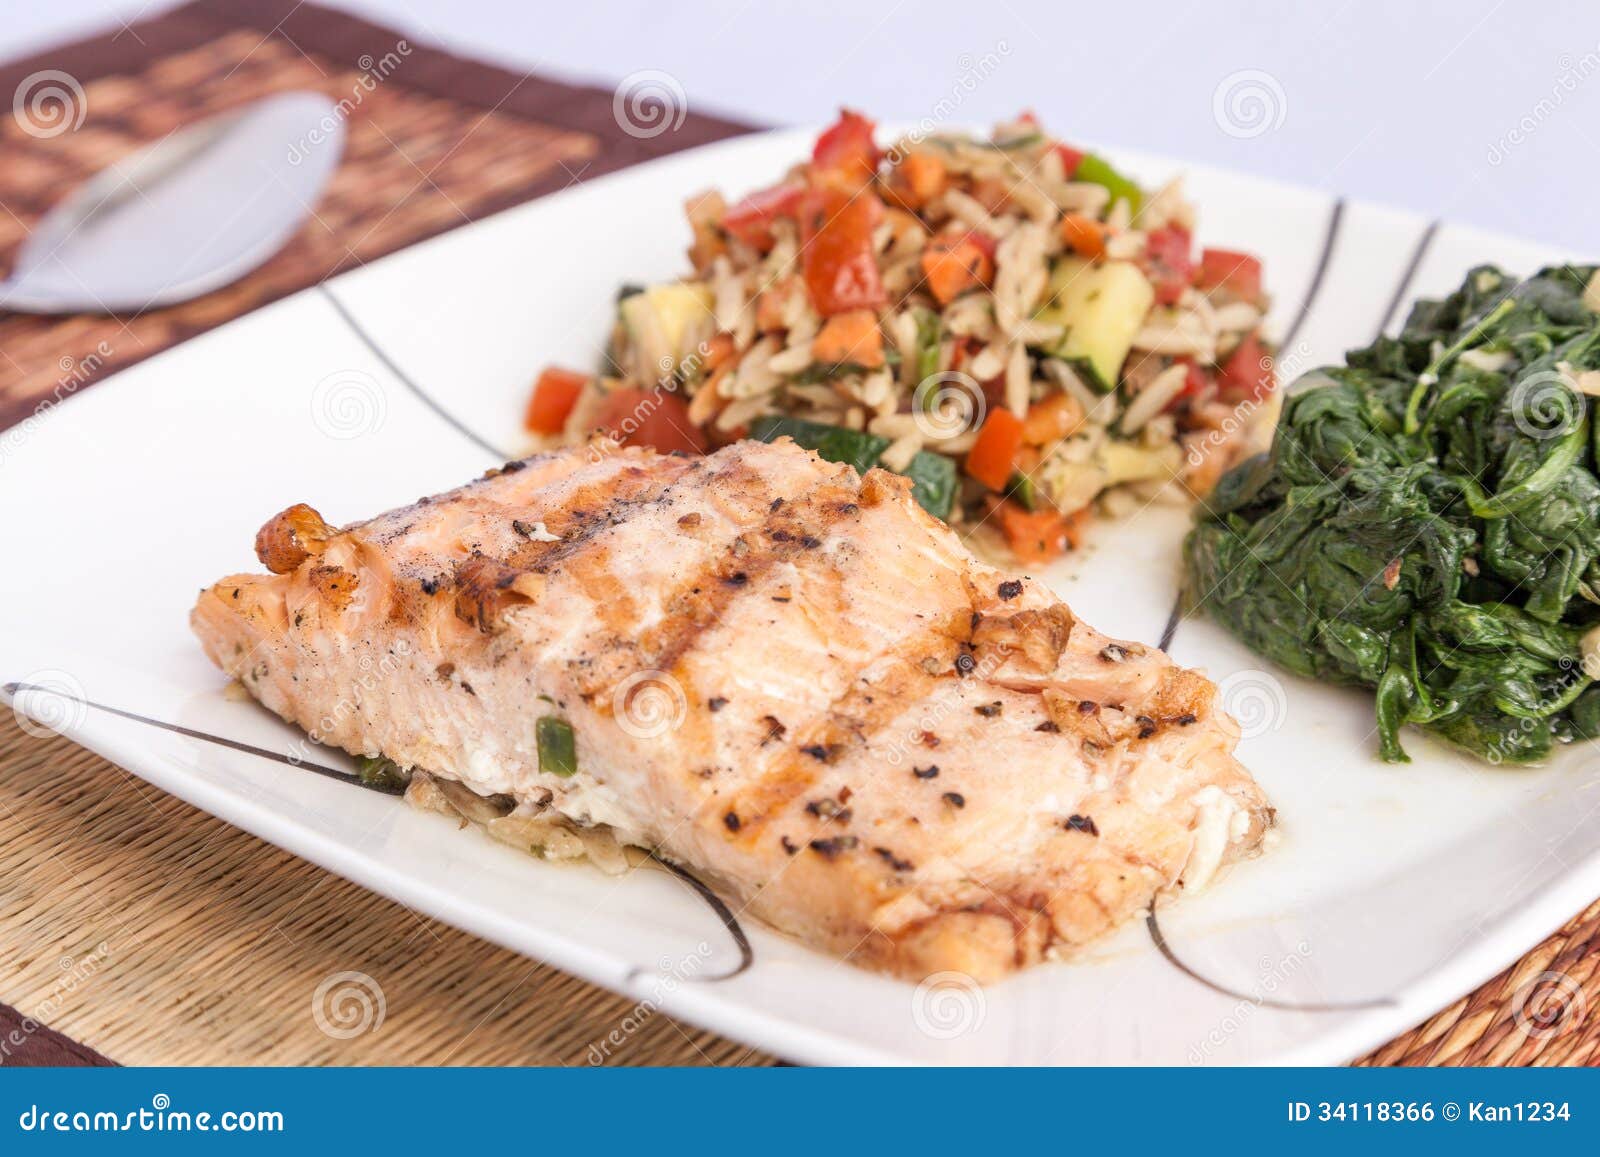 Delicious Grill Salmon With Side Dishes Royalty Free Stock Image ...